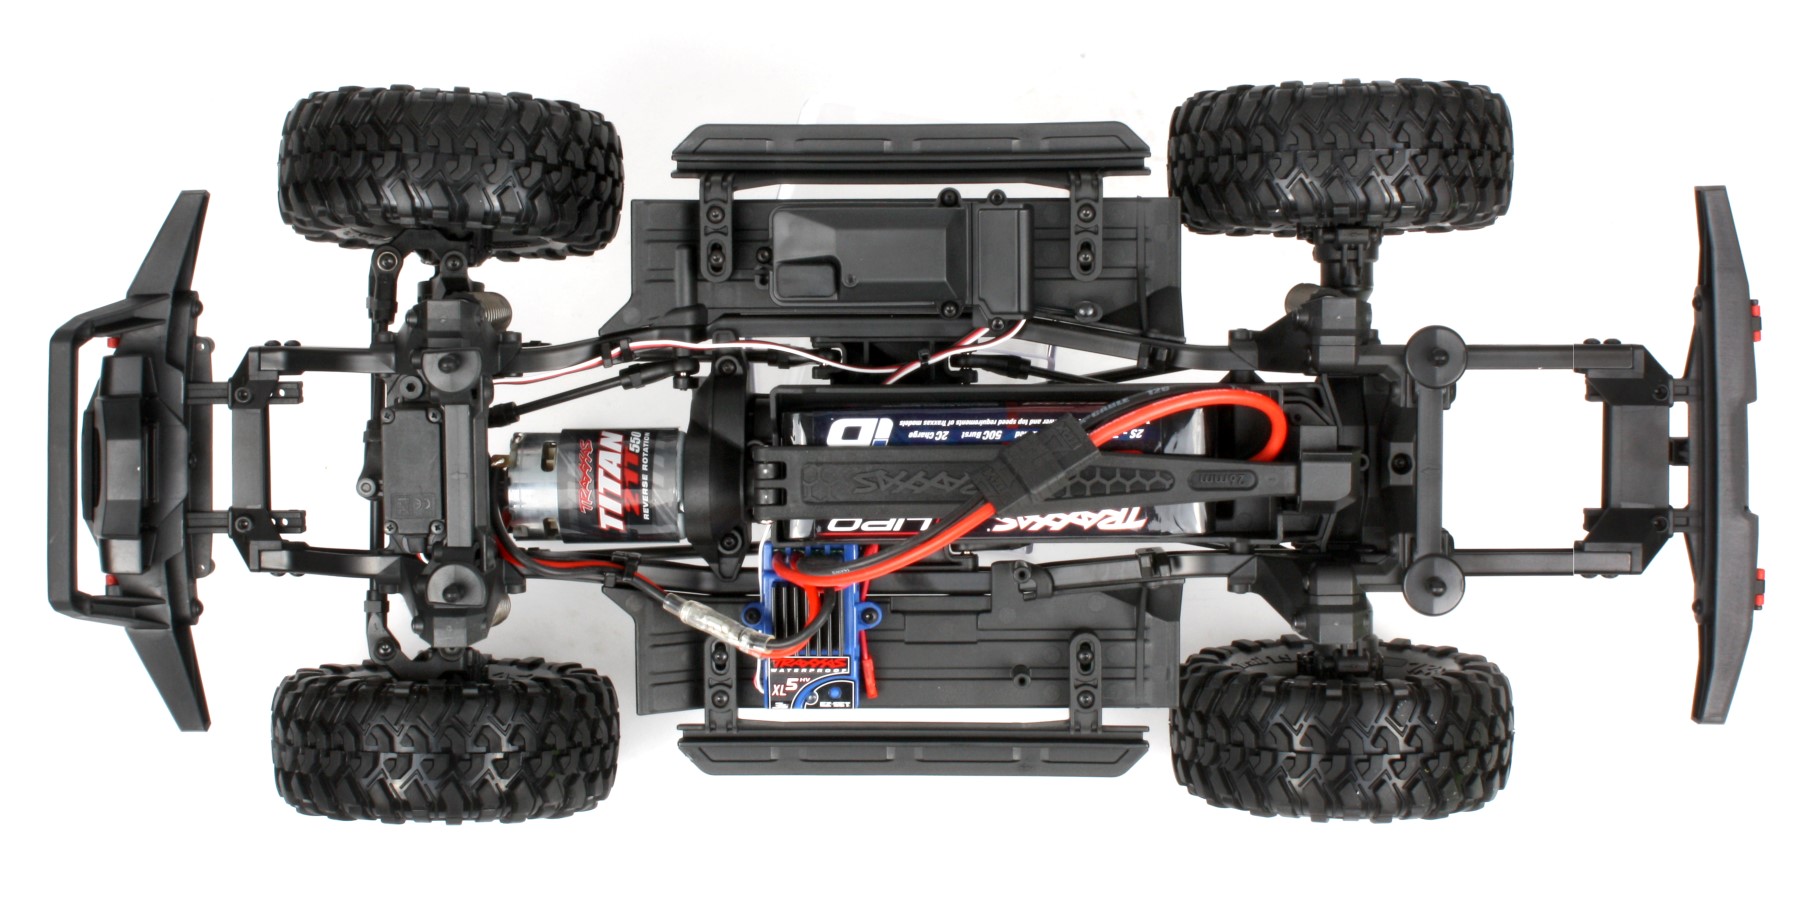 TRX4 Sport. The Best Beginners RC Crawler To Buy Now?